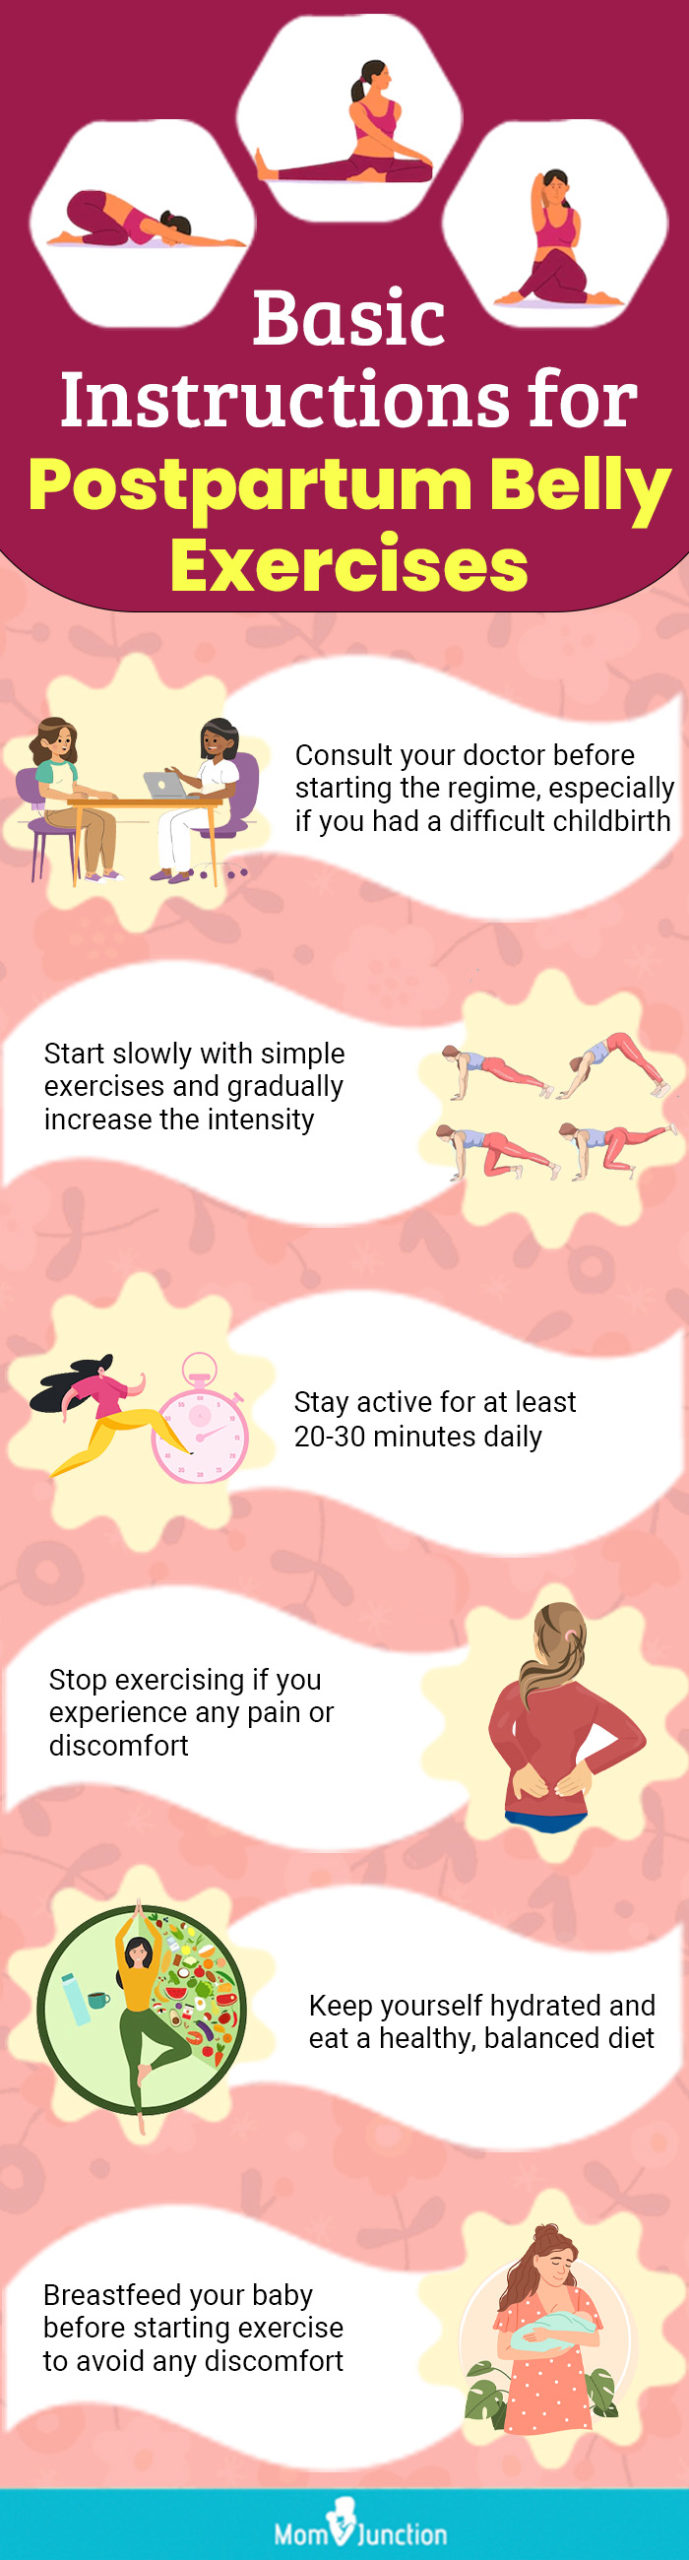 basic instructions for postpartum belly exercises (infographic)